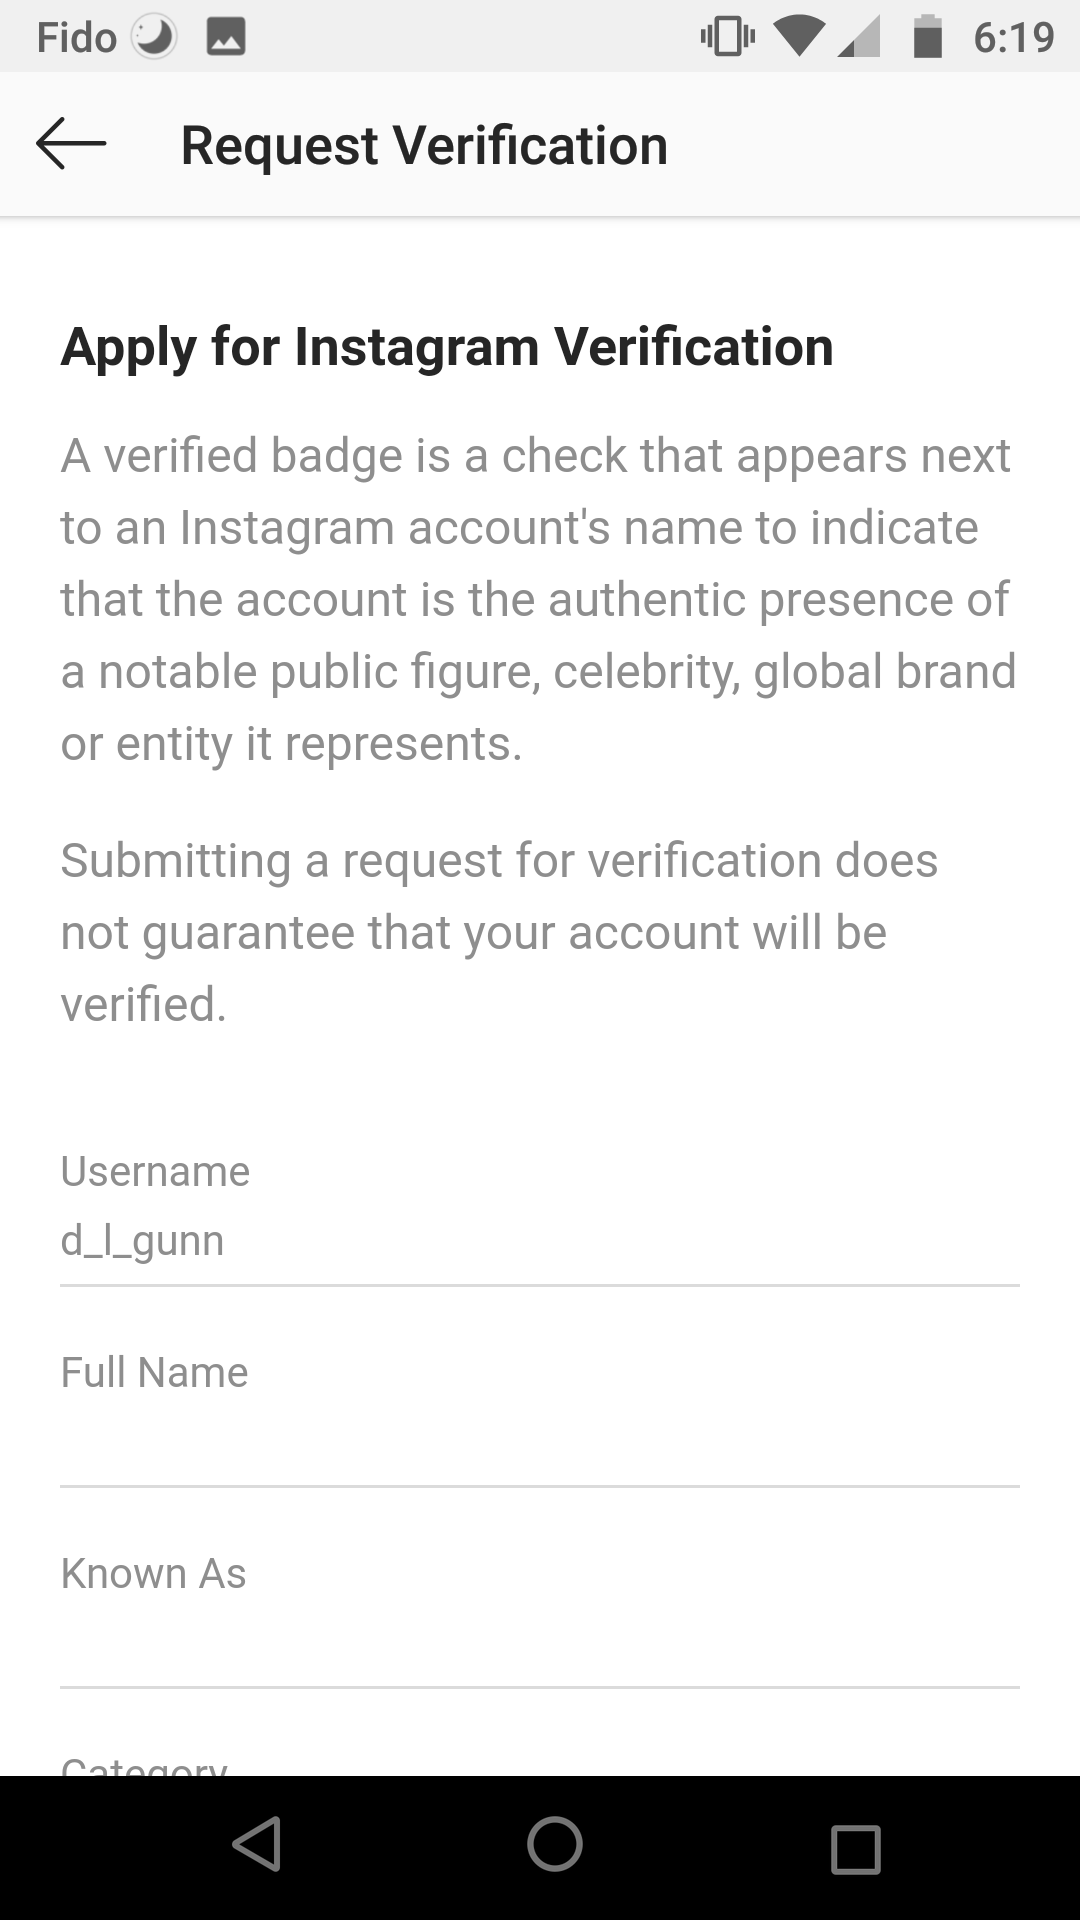 How to Get Verified on Instagram: Verification Request Form